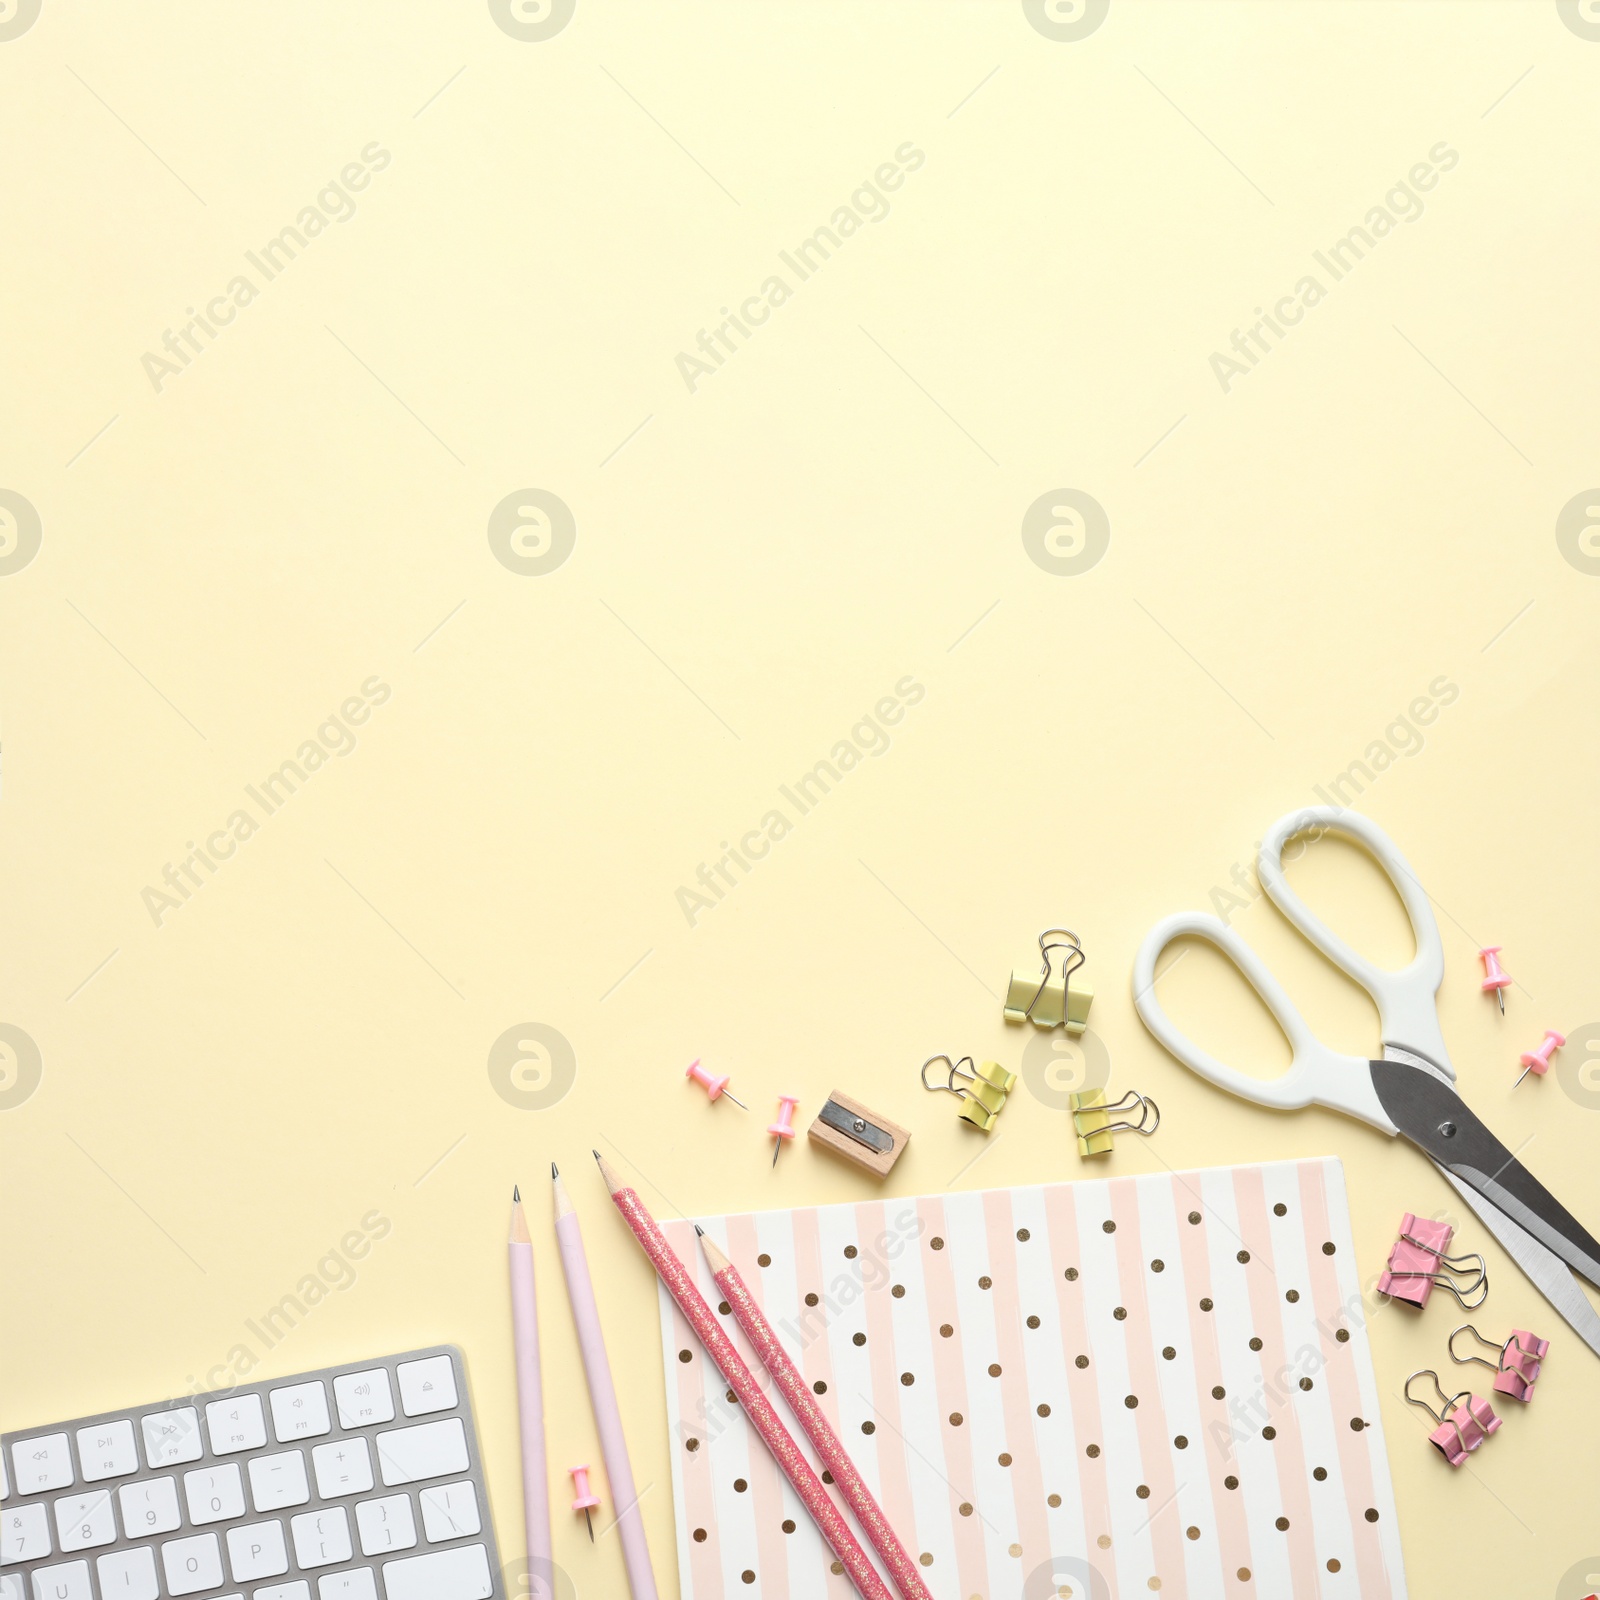 Image of Flat lay composition with scissors and office supplies on light background. Space for text